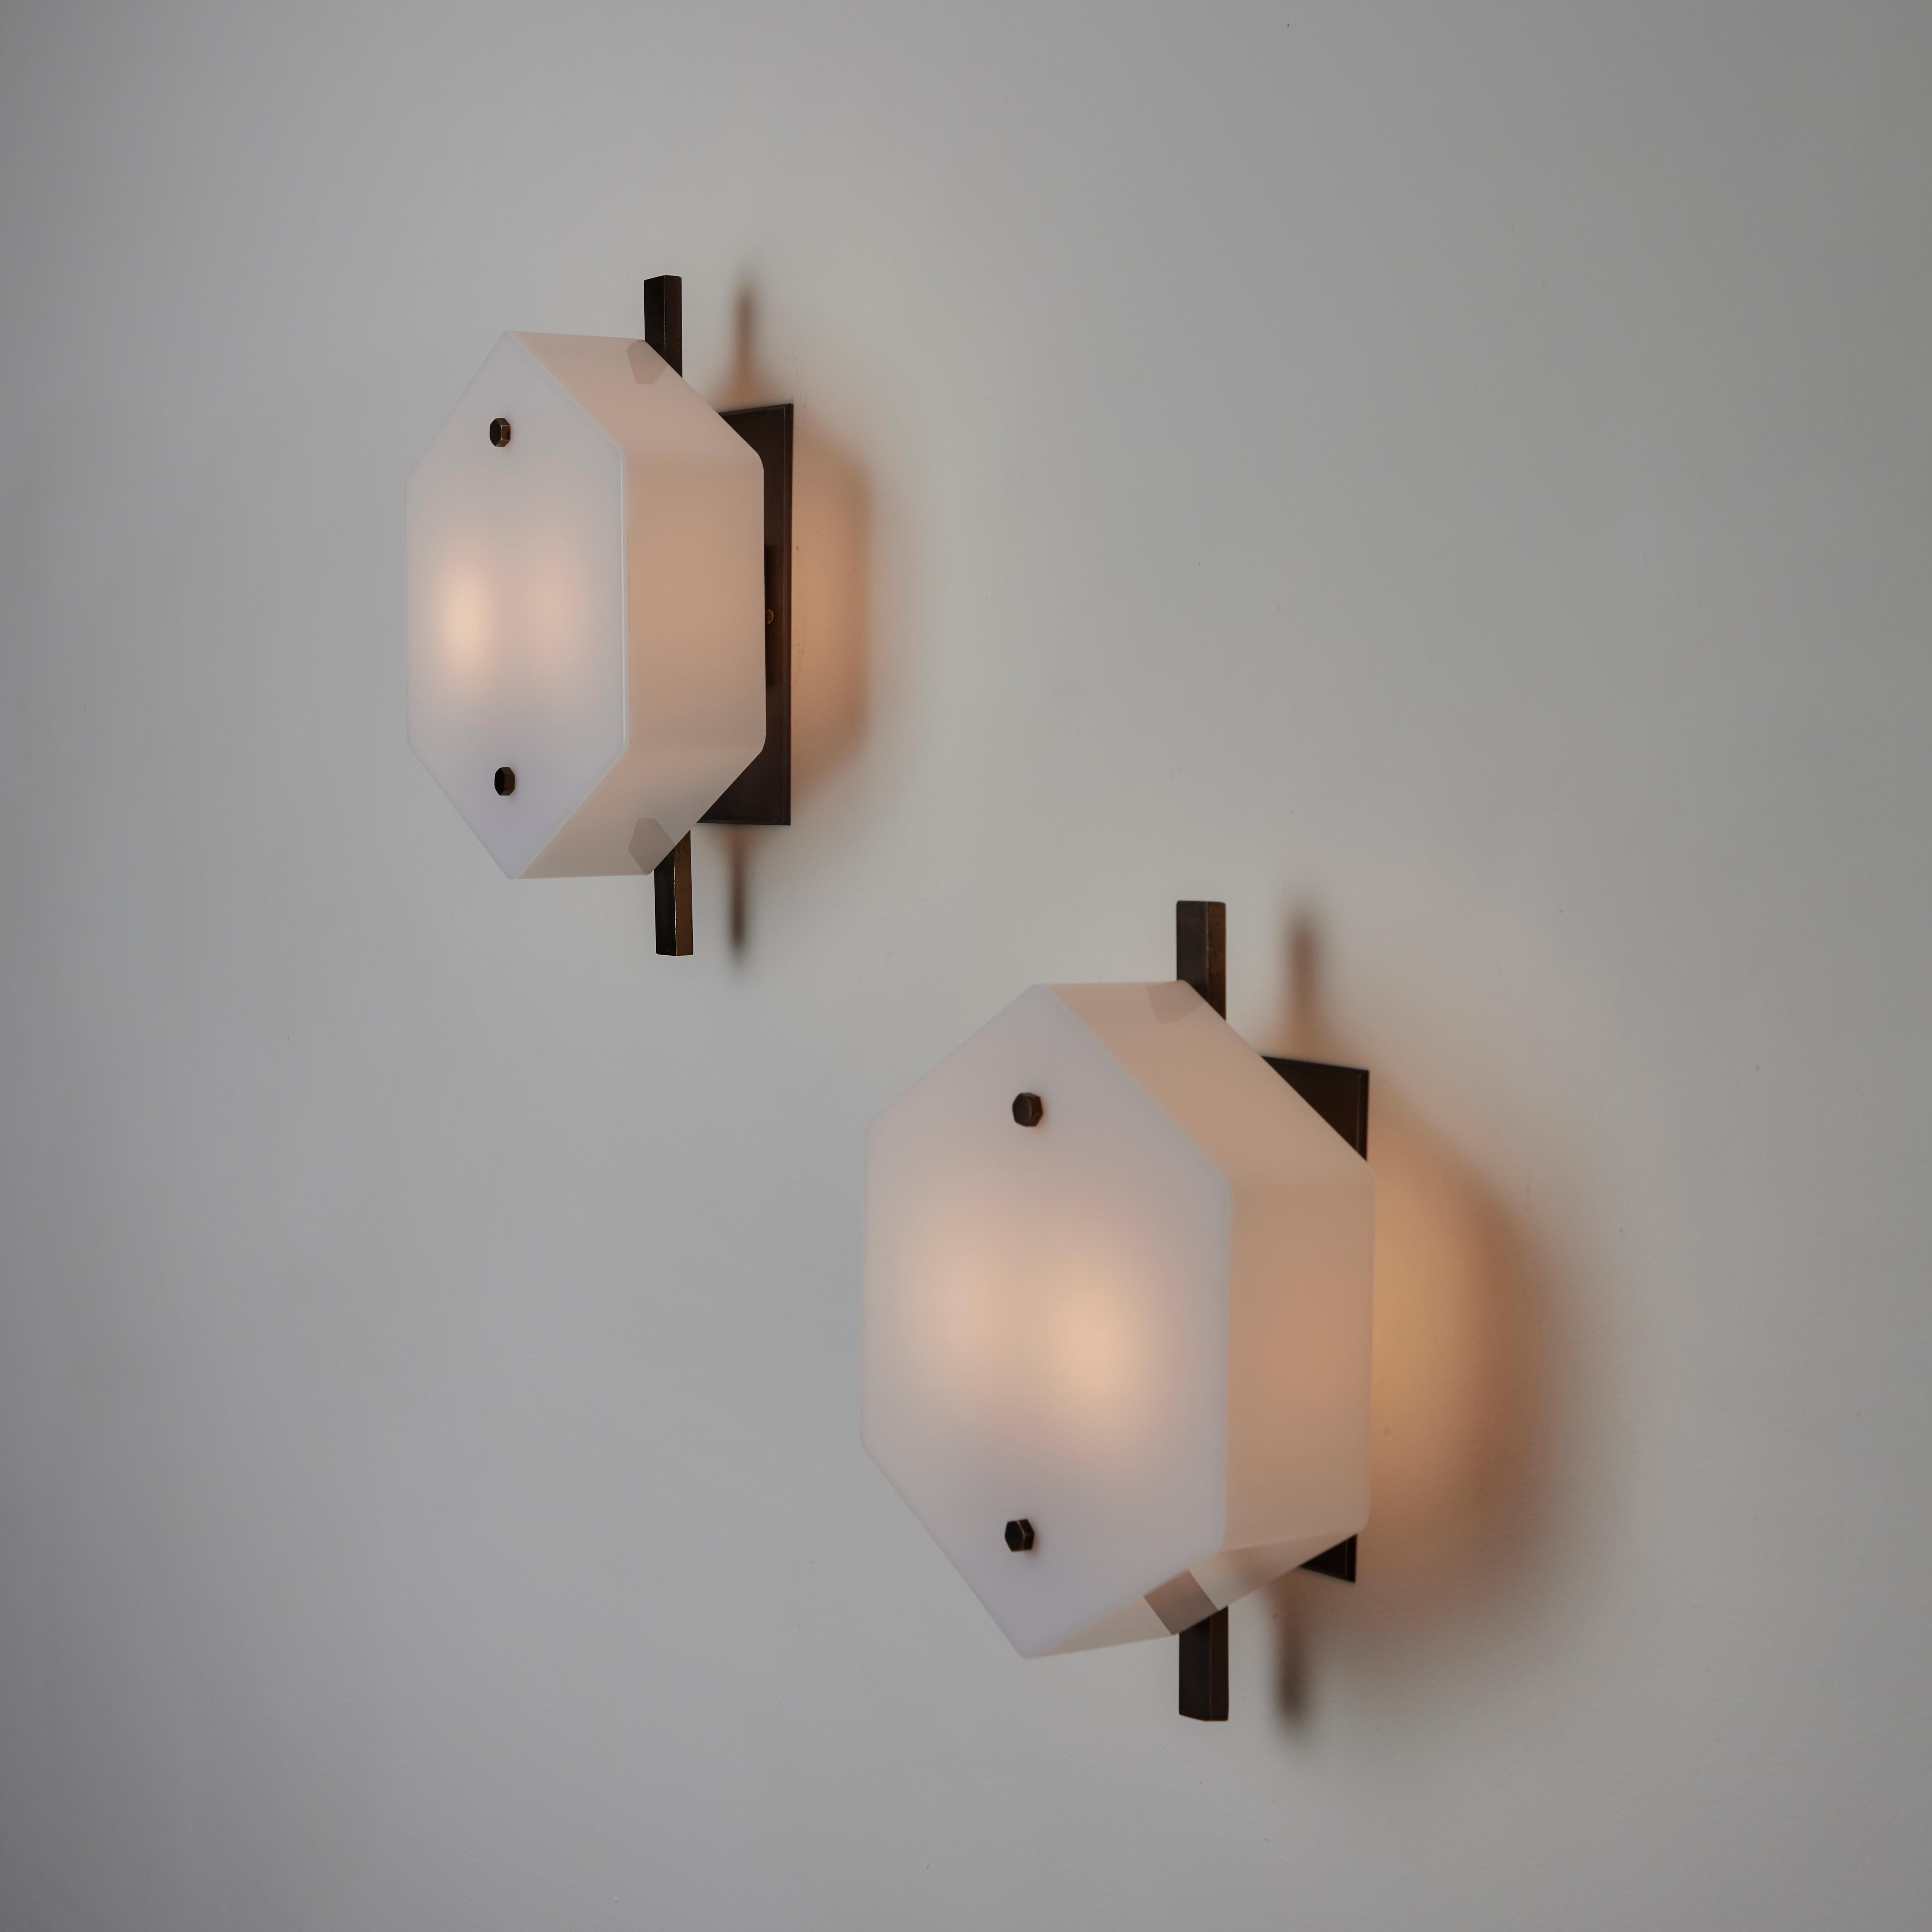 Pair of Sconces by Stilux. Designed and manufactured in Italy, circa the 1960s. Hexagonal acrylic diffusers alongside a dark patinated brass stem. Each lamp holds a dual E14 socket type, adapted for the US. We recommend a 25w max bulb or LED for